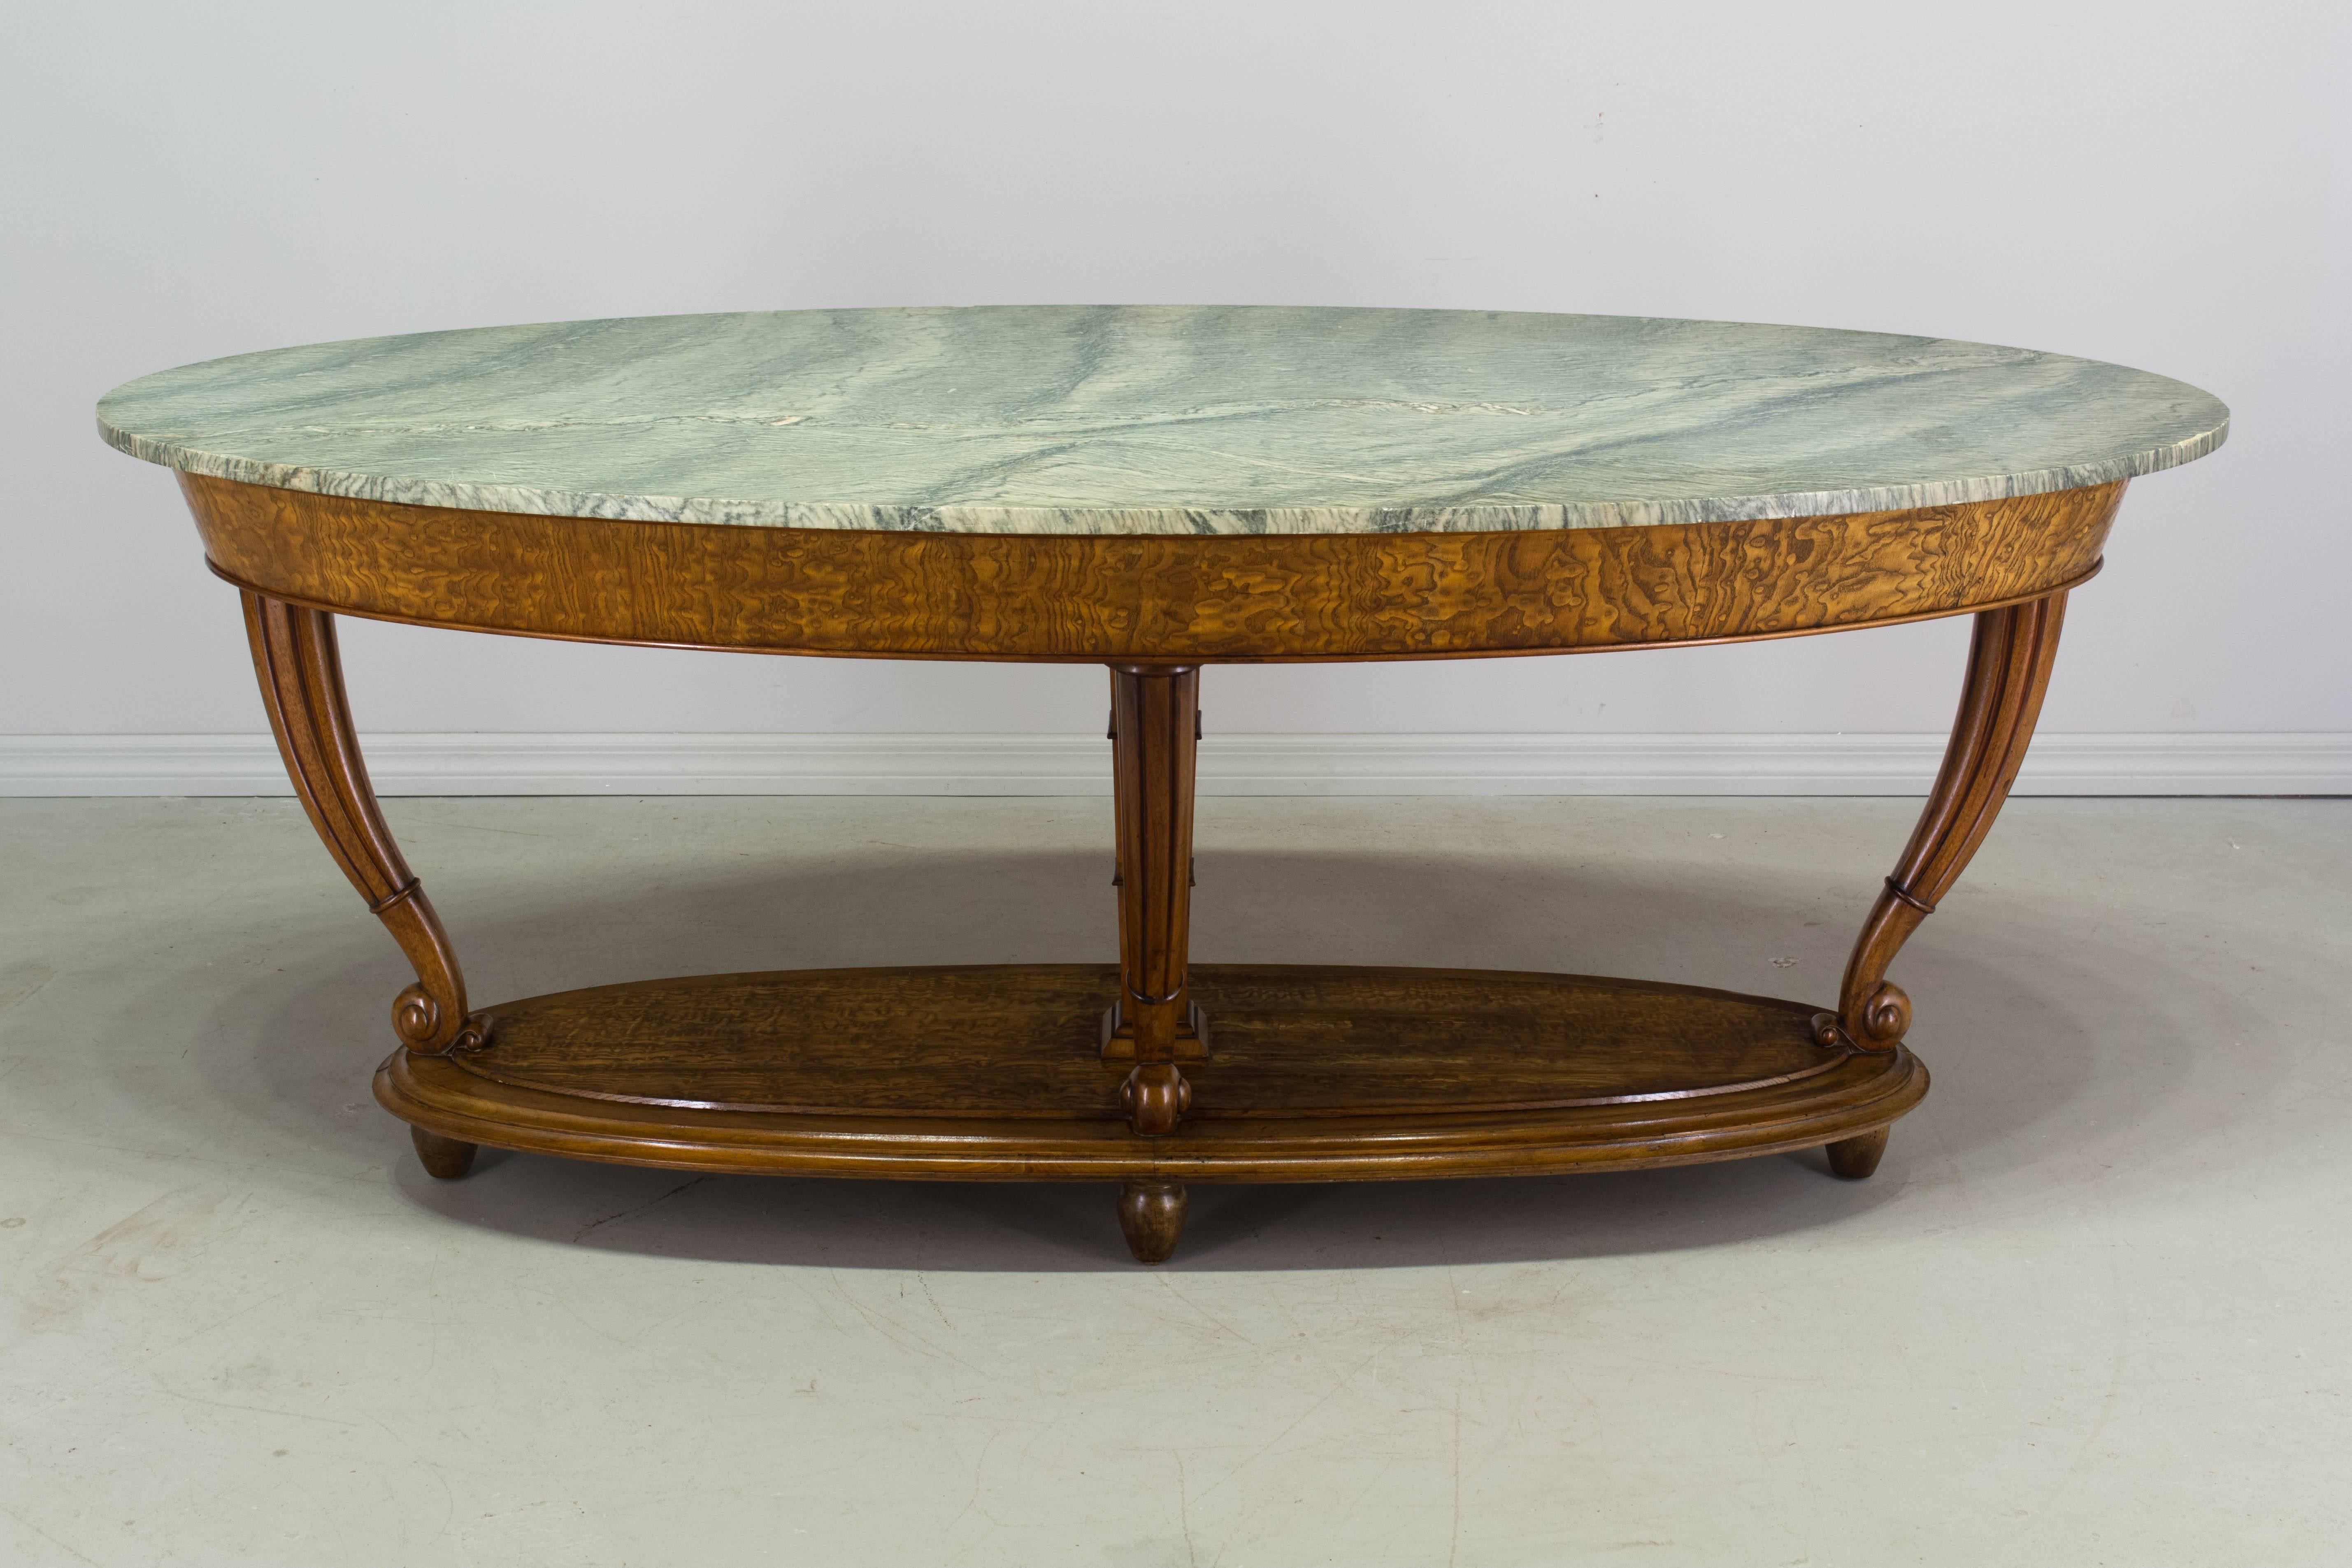 A fine Italian oval center table with an exquisite cipollino marble top. The frame is made of walnut with solid carved walnut legs and bun feet. The apron and the top of the base are burl of elm veneer with a wavy wood grain that mimics the ocean